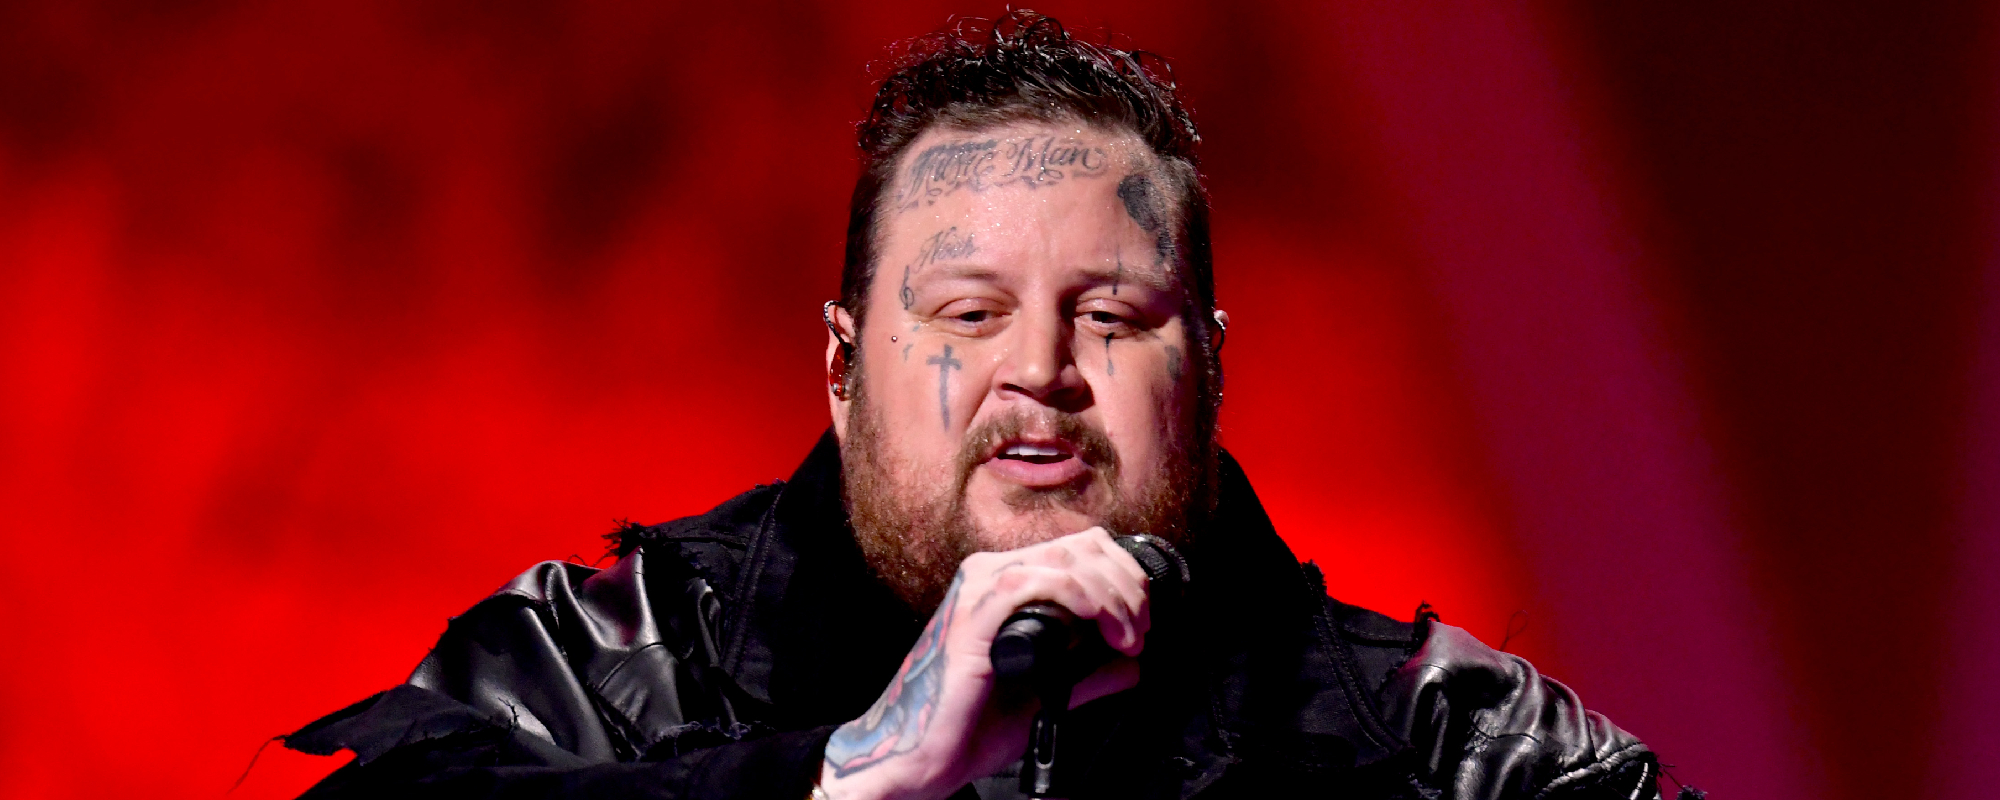 Jelly Roll Sued for Trademark Infringement From Wedding Band